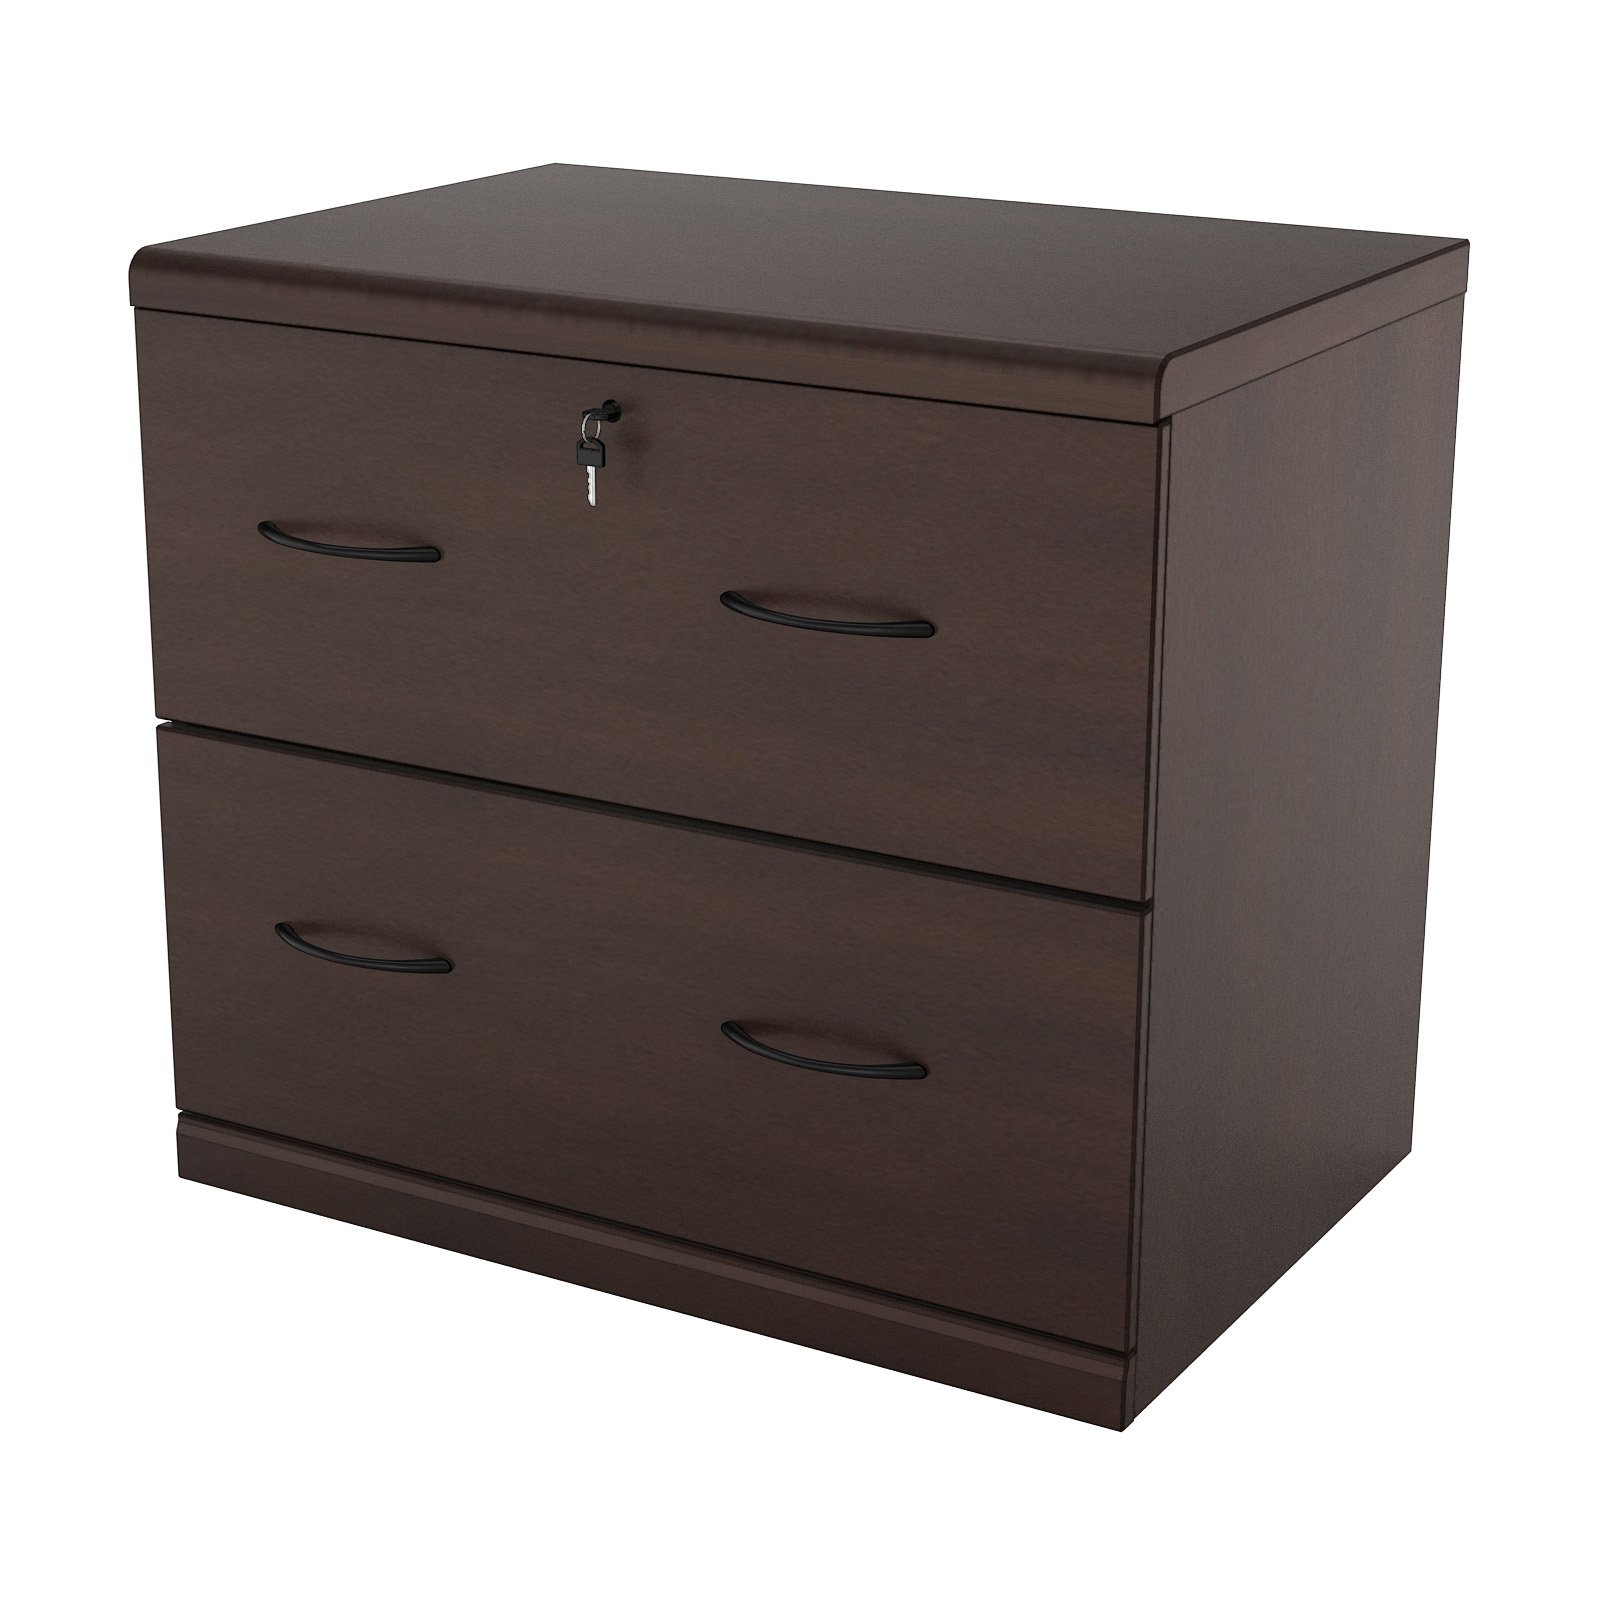 2 Drawer Lateral Wood Lockable Filing Cabinet Espresso Walmart pertaining to dimensions 1600 X 1600